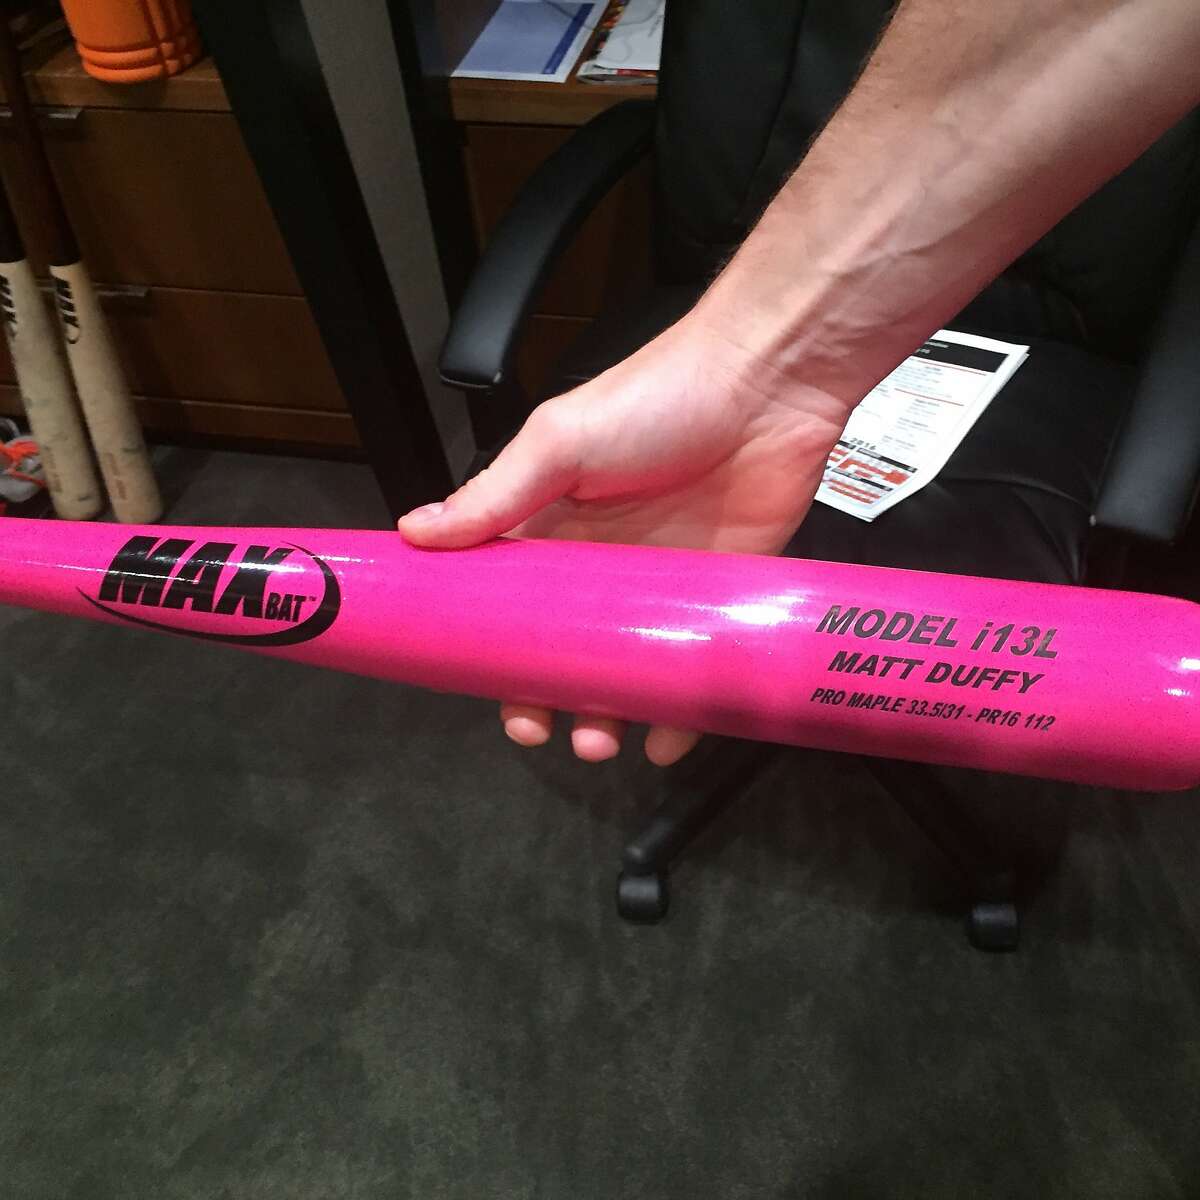 Matt Duffy of the San Francisco Giants displays his pink bat that he used against the Colorado Rockies on Mother's Day, May 8 2016, at AT& Park.